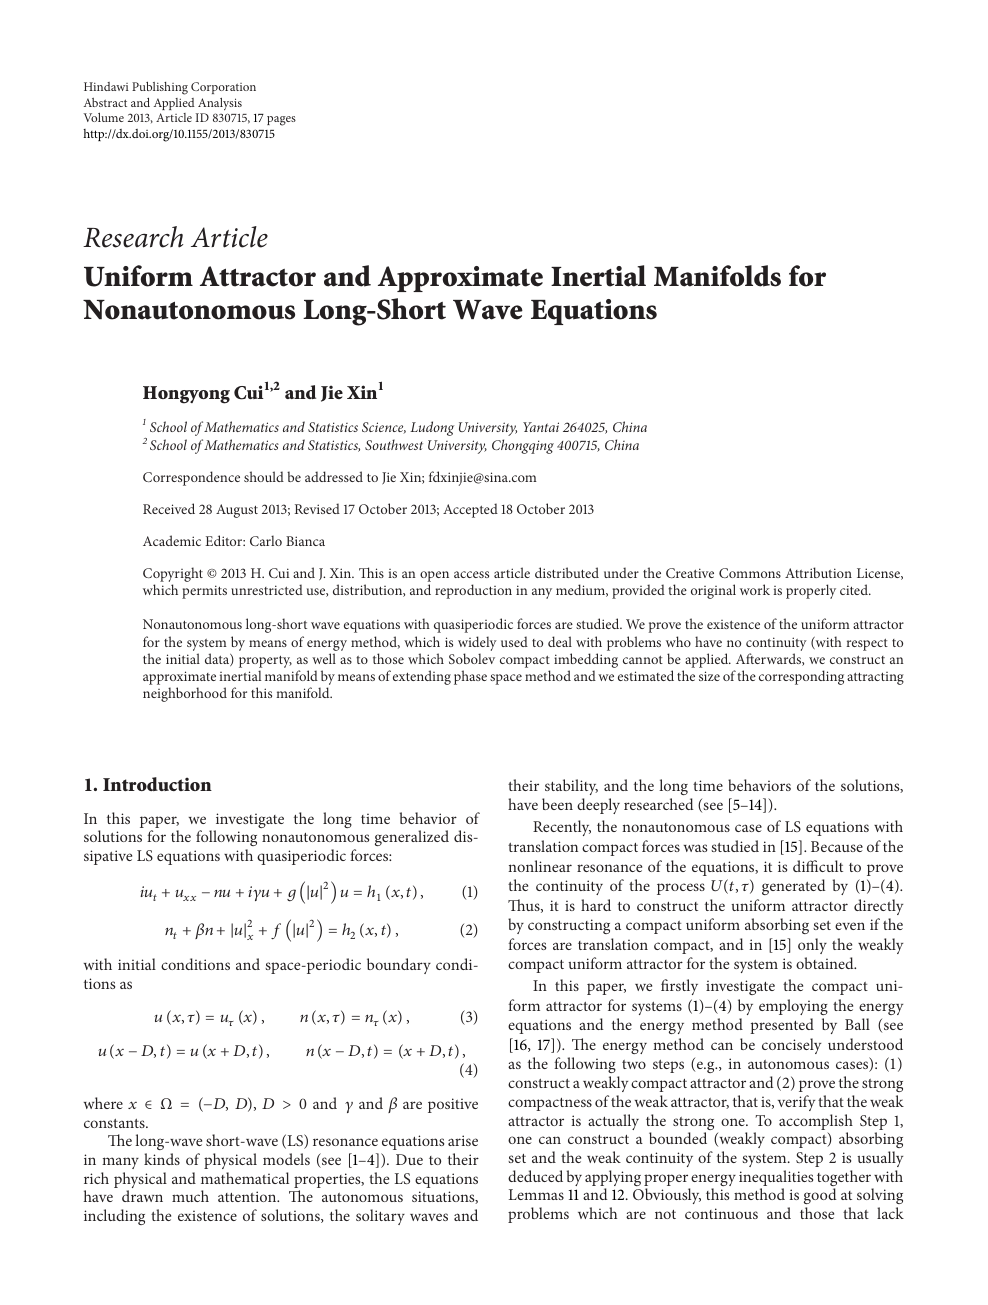 Uniform Attractor And Approximate Inertial Manifolds For Nonautonomous Long Short Wave Equations Topic Of Research Paper In Mathematics Download Scholarly Article Pdf And Read For Free On Cyberleninka Open Science Hub